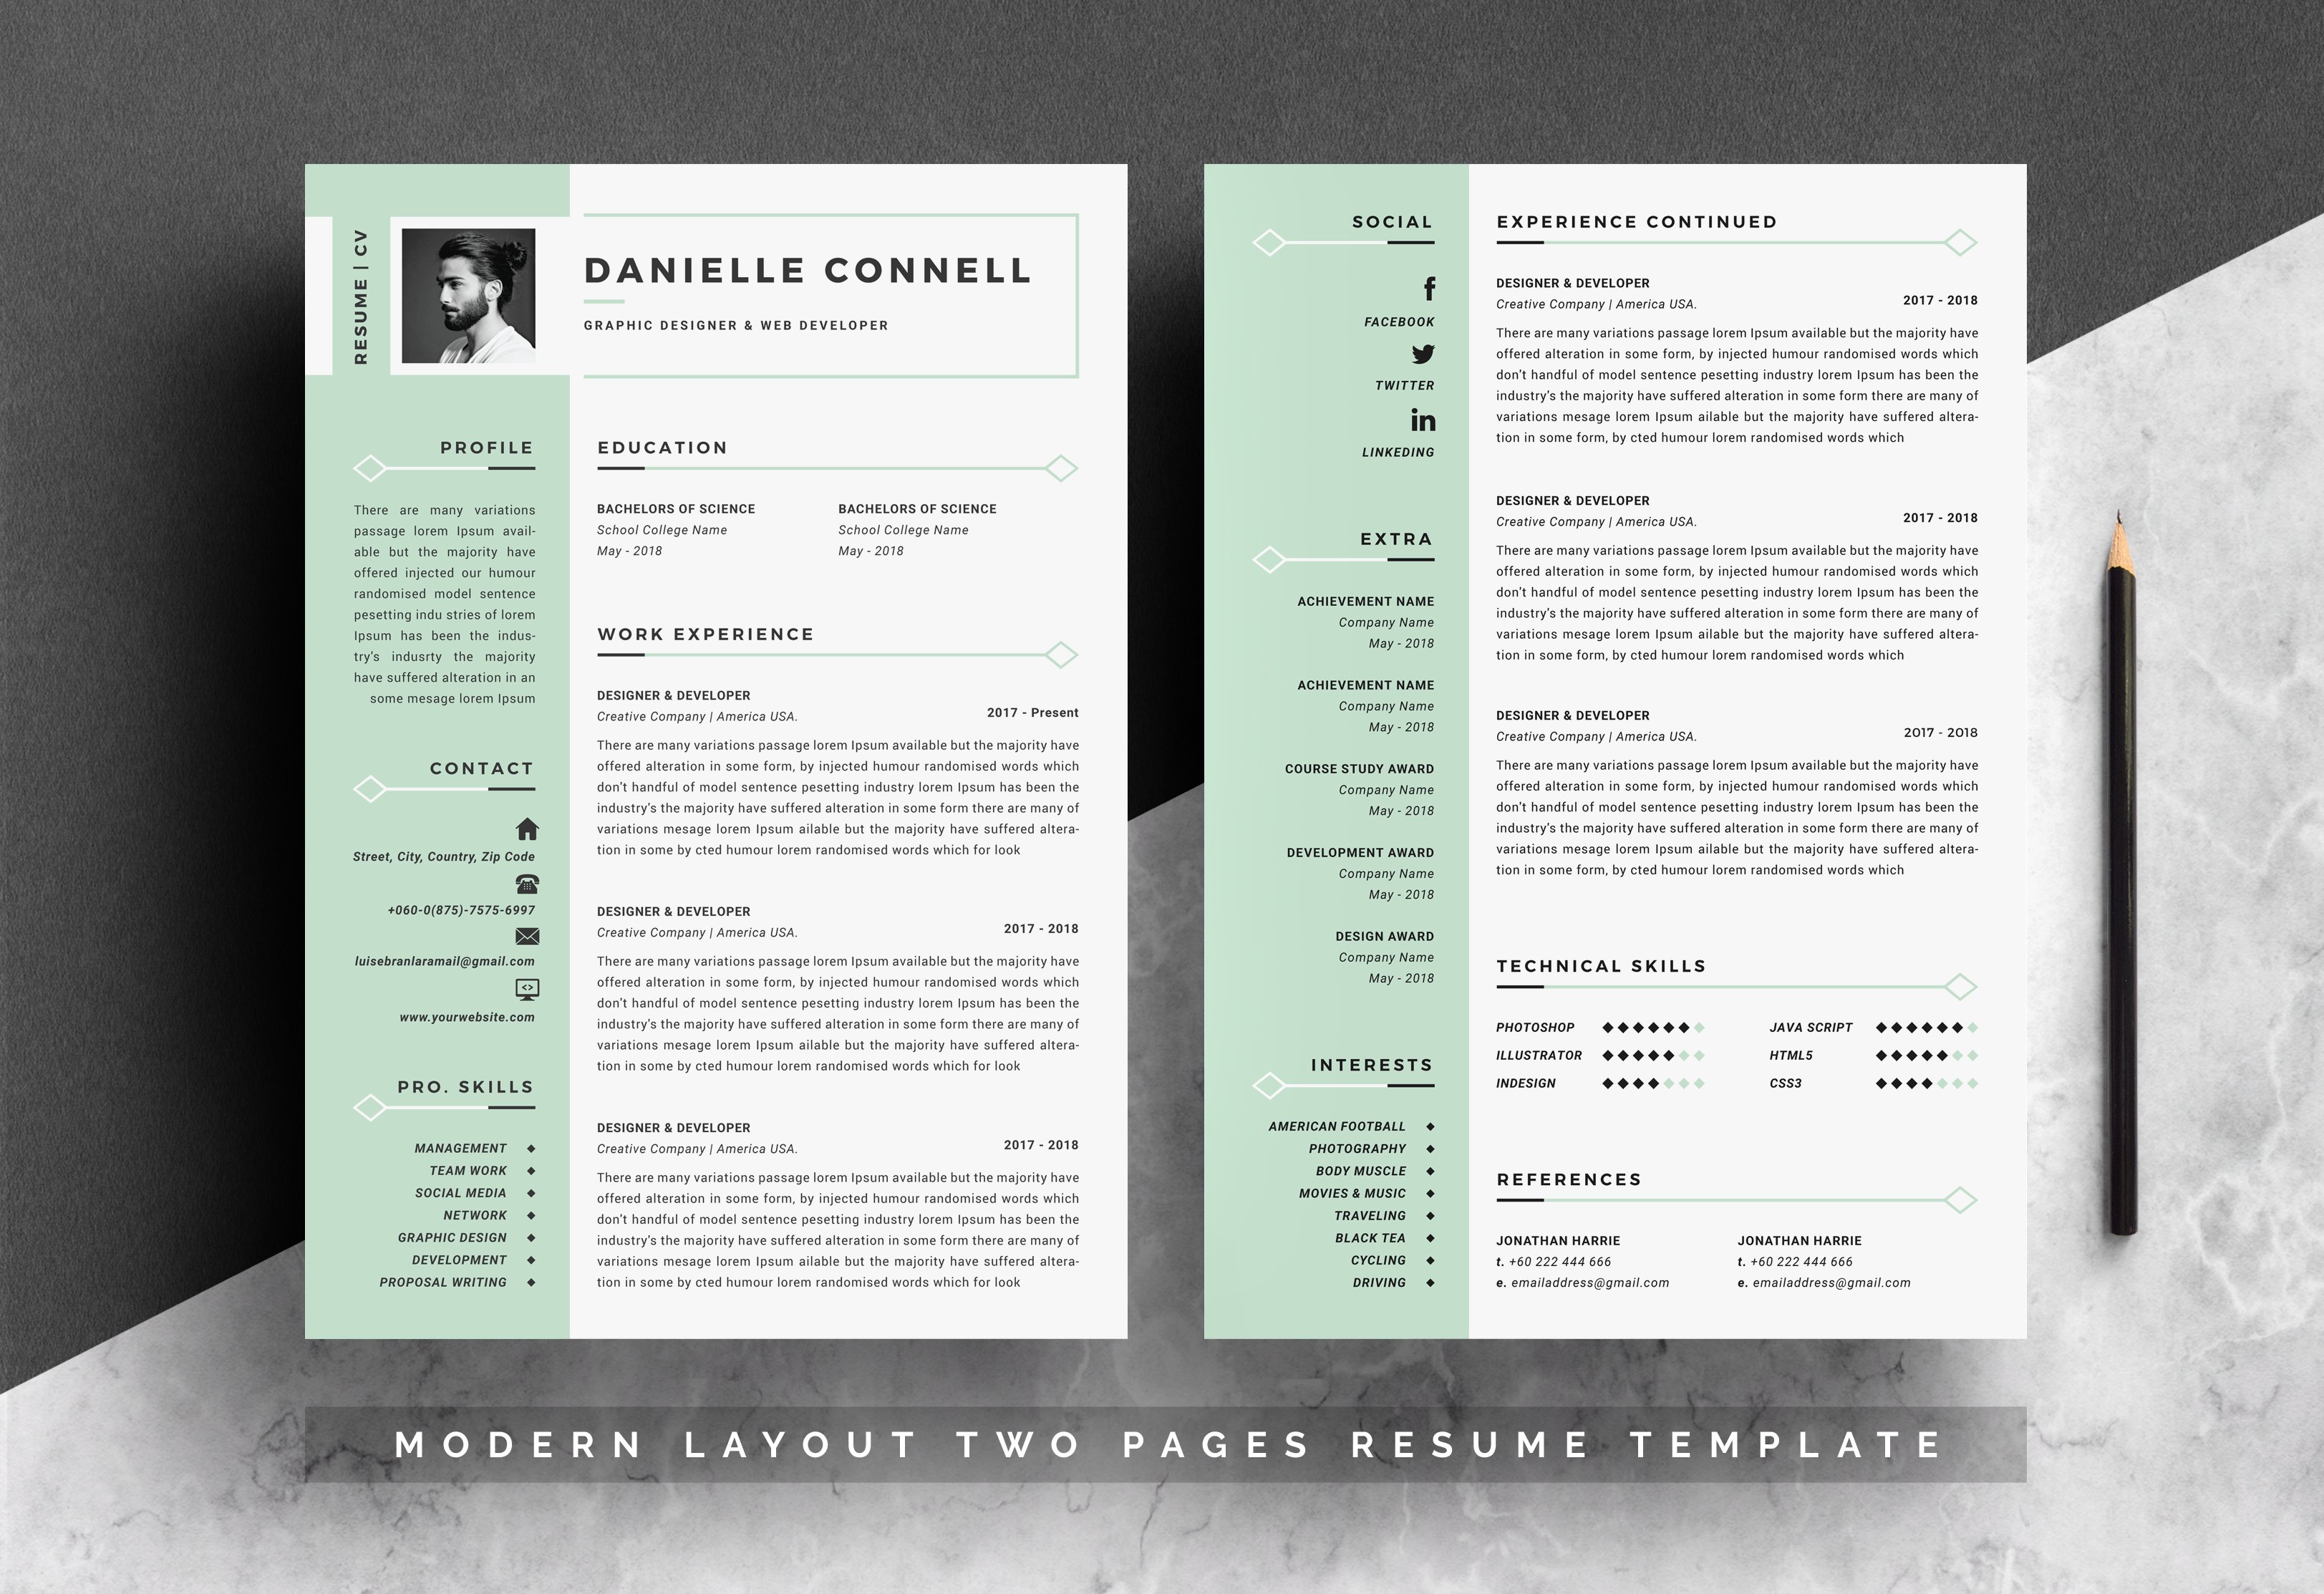 Word Resume Template & Cover Letter preview image.